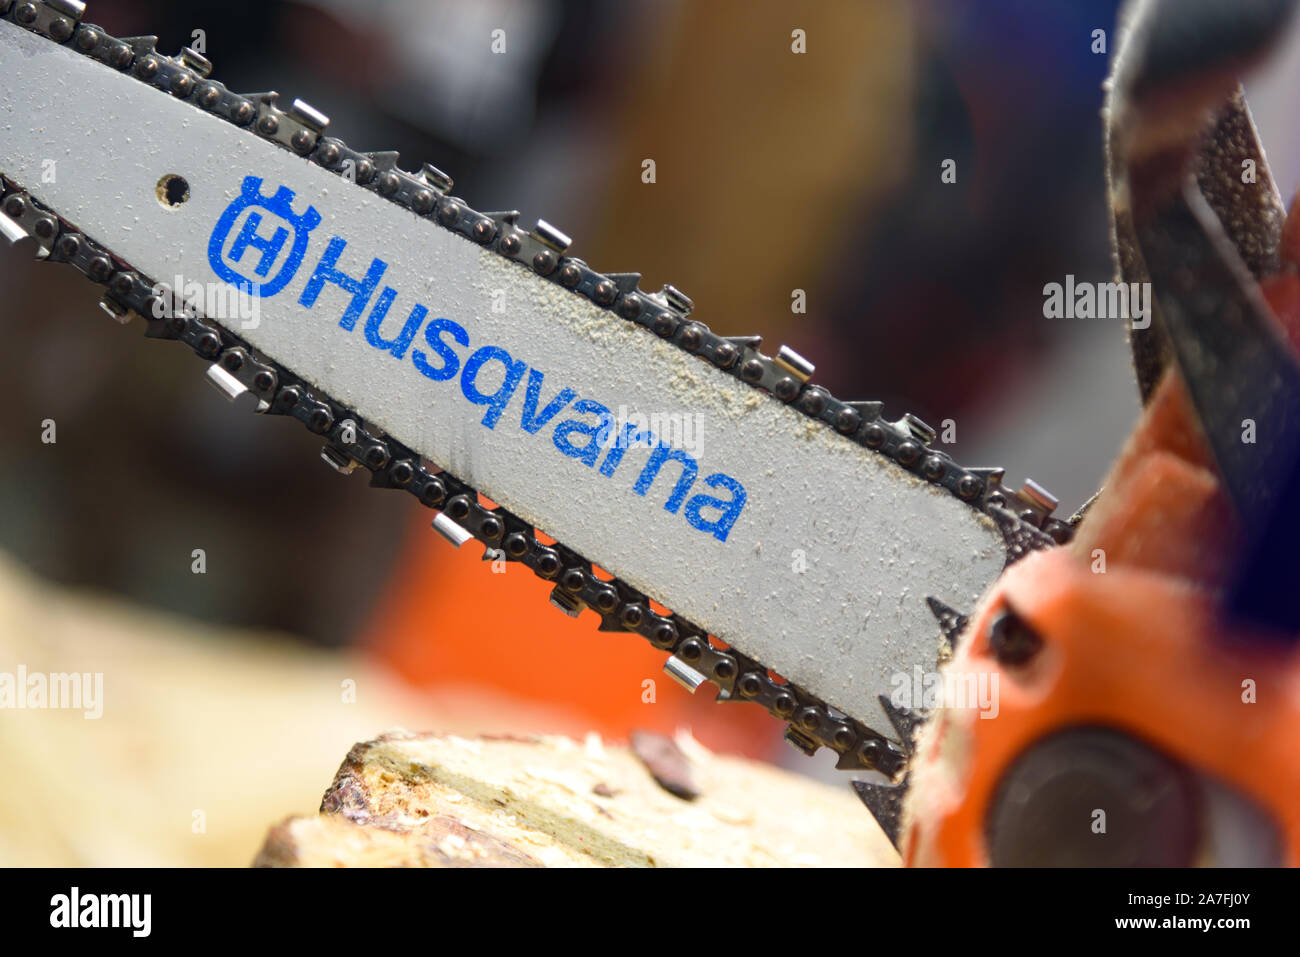 Kielce, Poland, March 16, 2019: Presentation of Chainsaw Husqvarna in clos-up. Husqvarna Group is manufacturer of outdoor power products based in Stoc Stock Photo